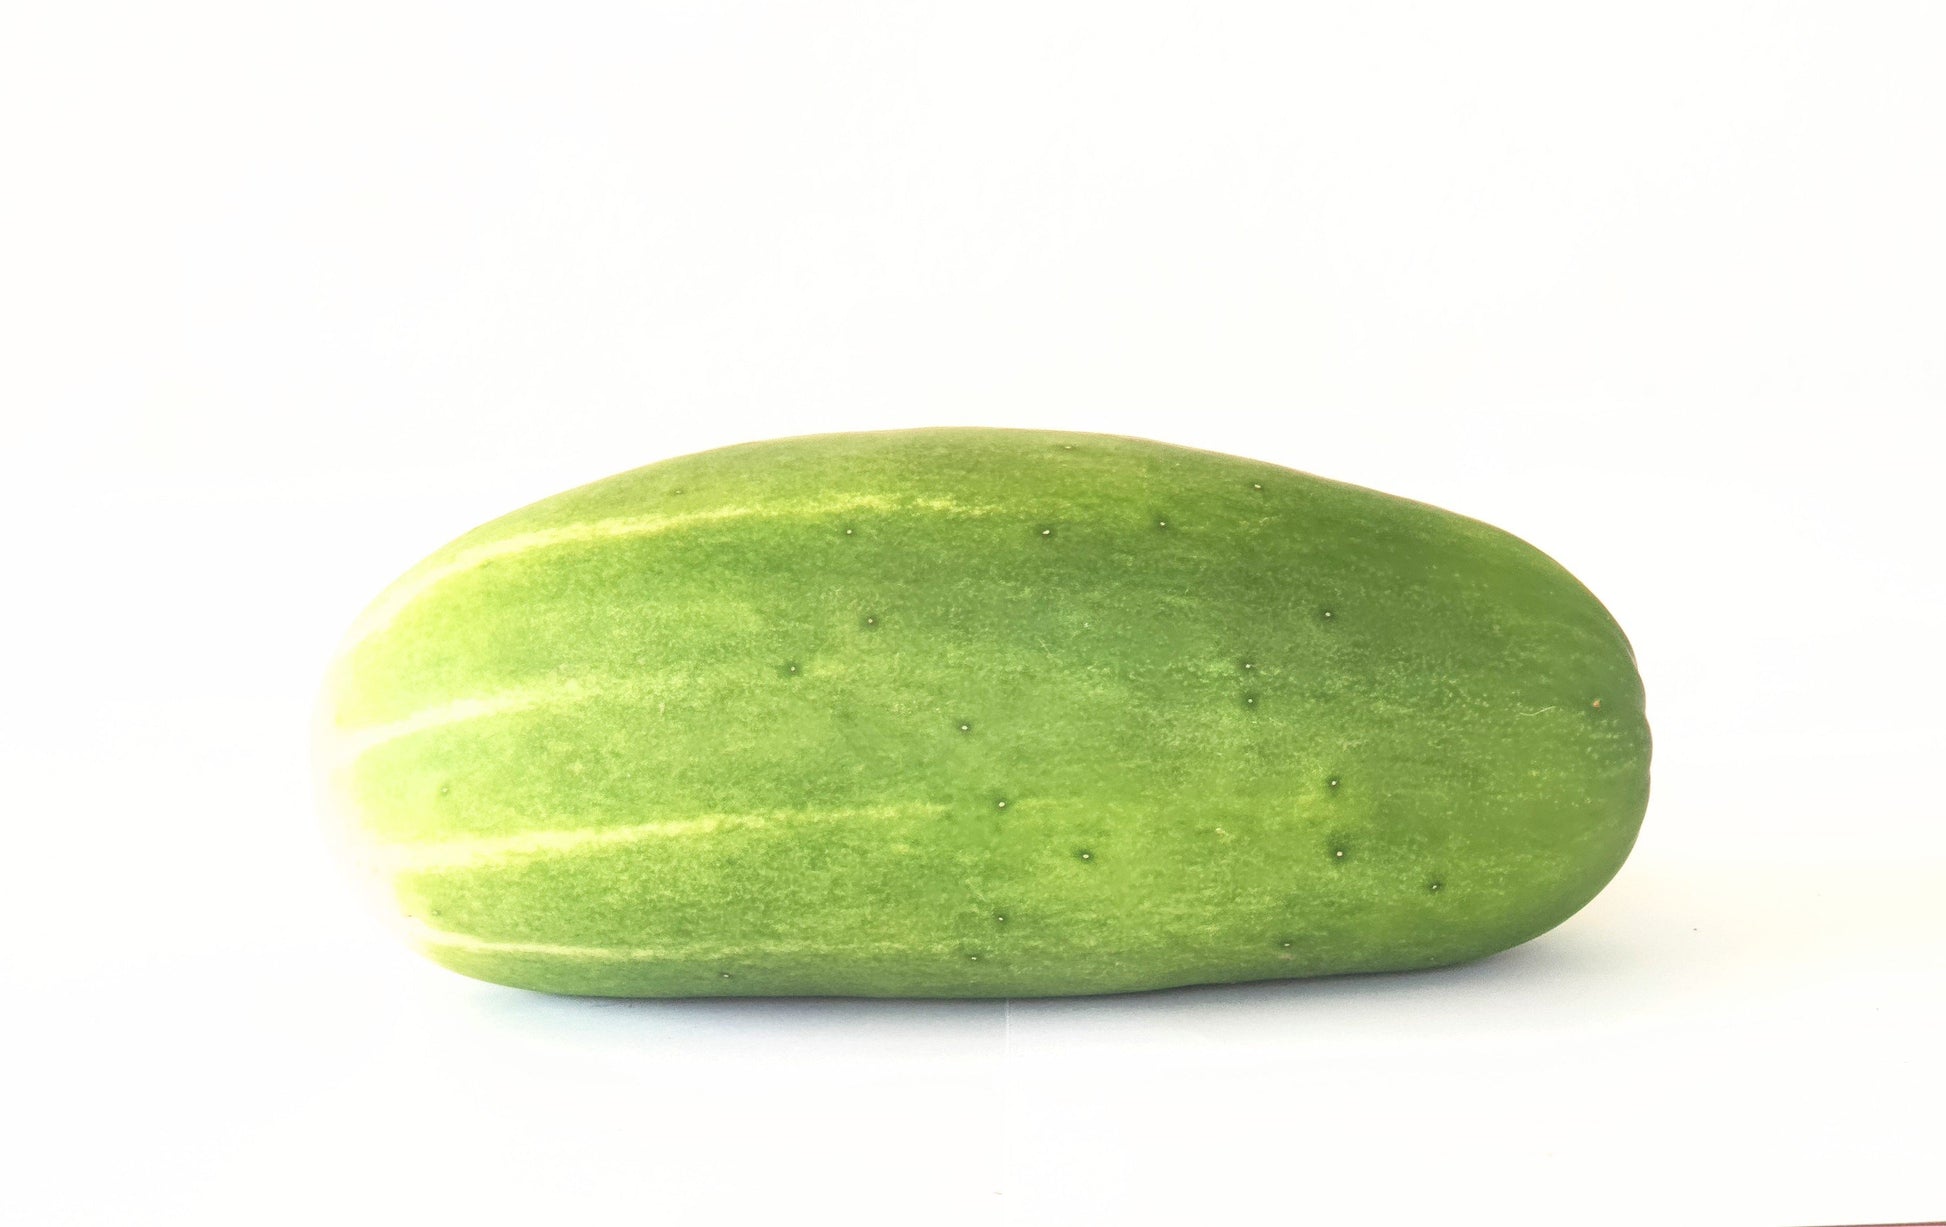 500g pack of cucumbers